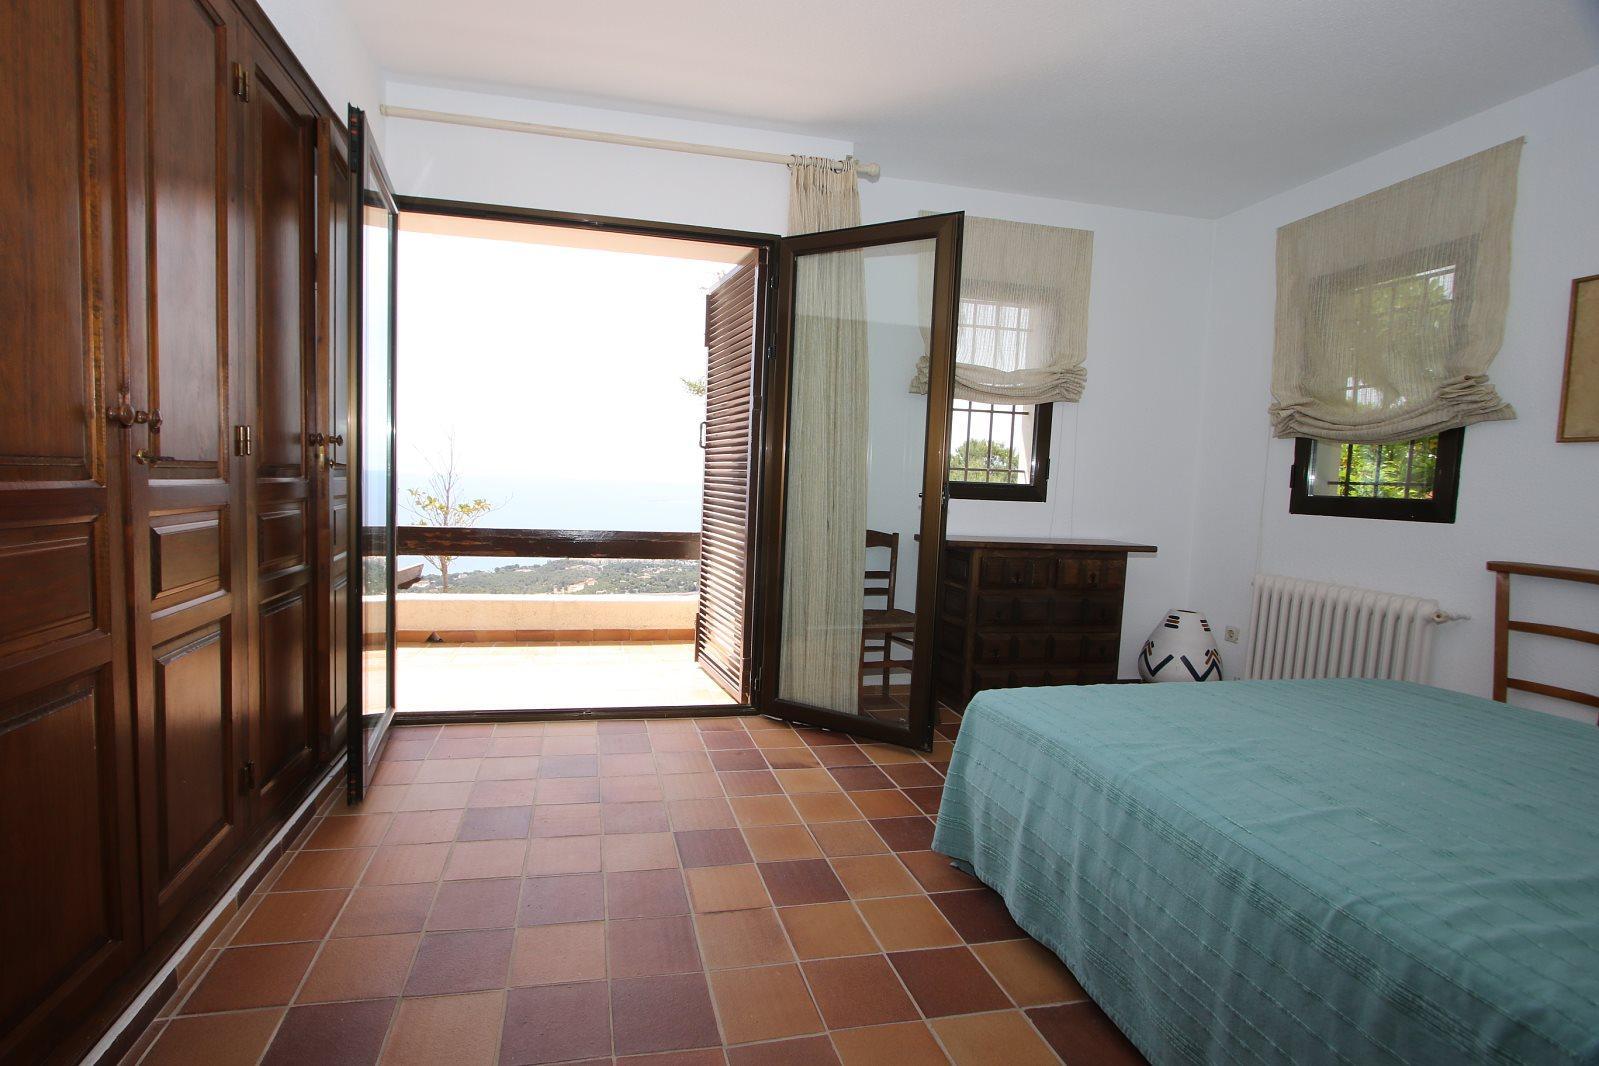 Villa with spectacular views over the entire bay in Altea